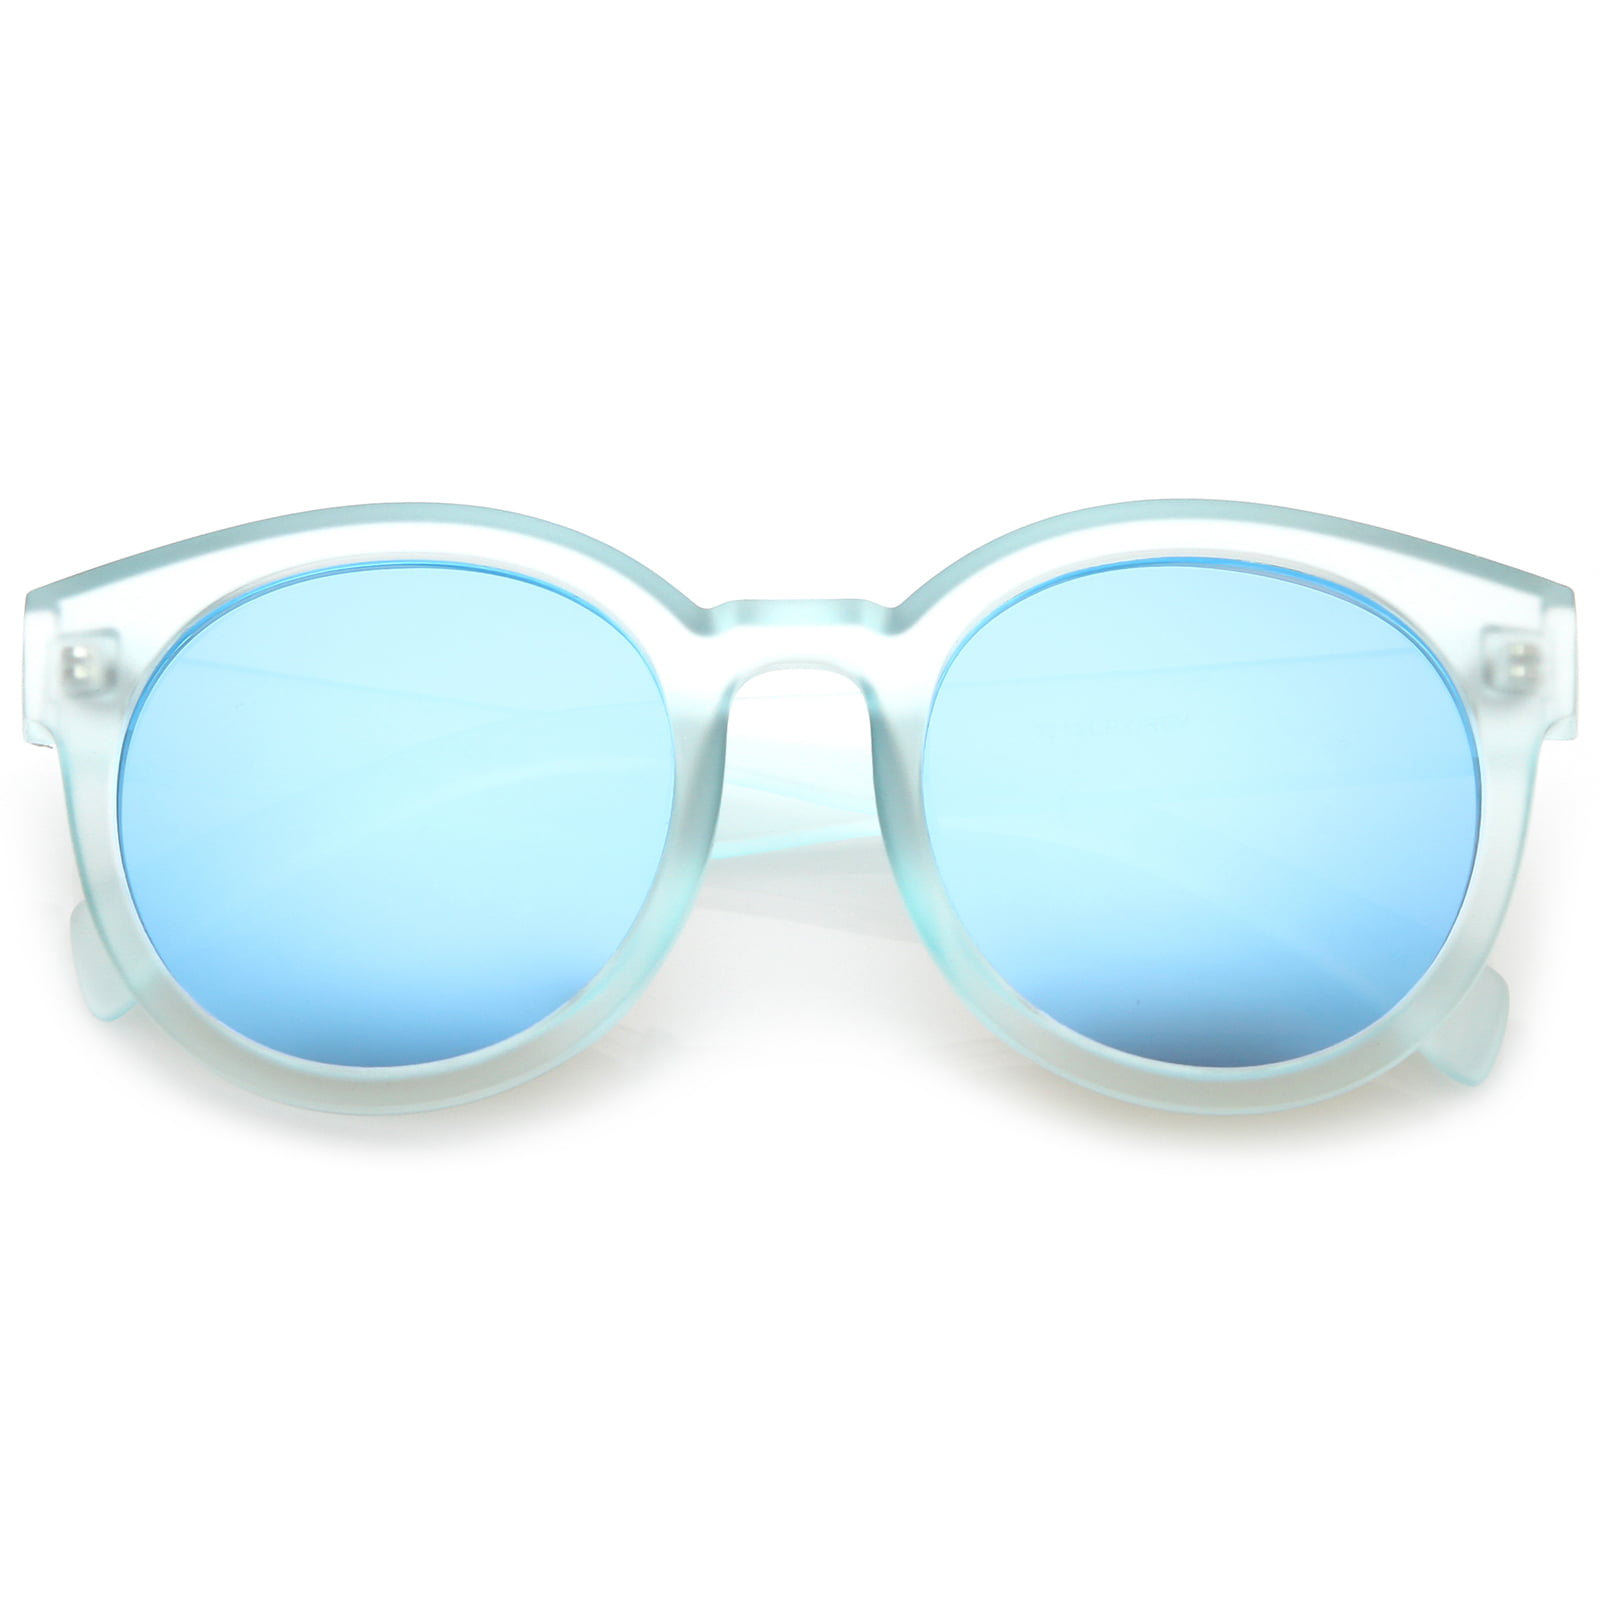 Women's Translucent Frost Horn Rimmed Mirrored Flat Lens Round ...